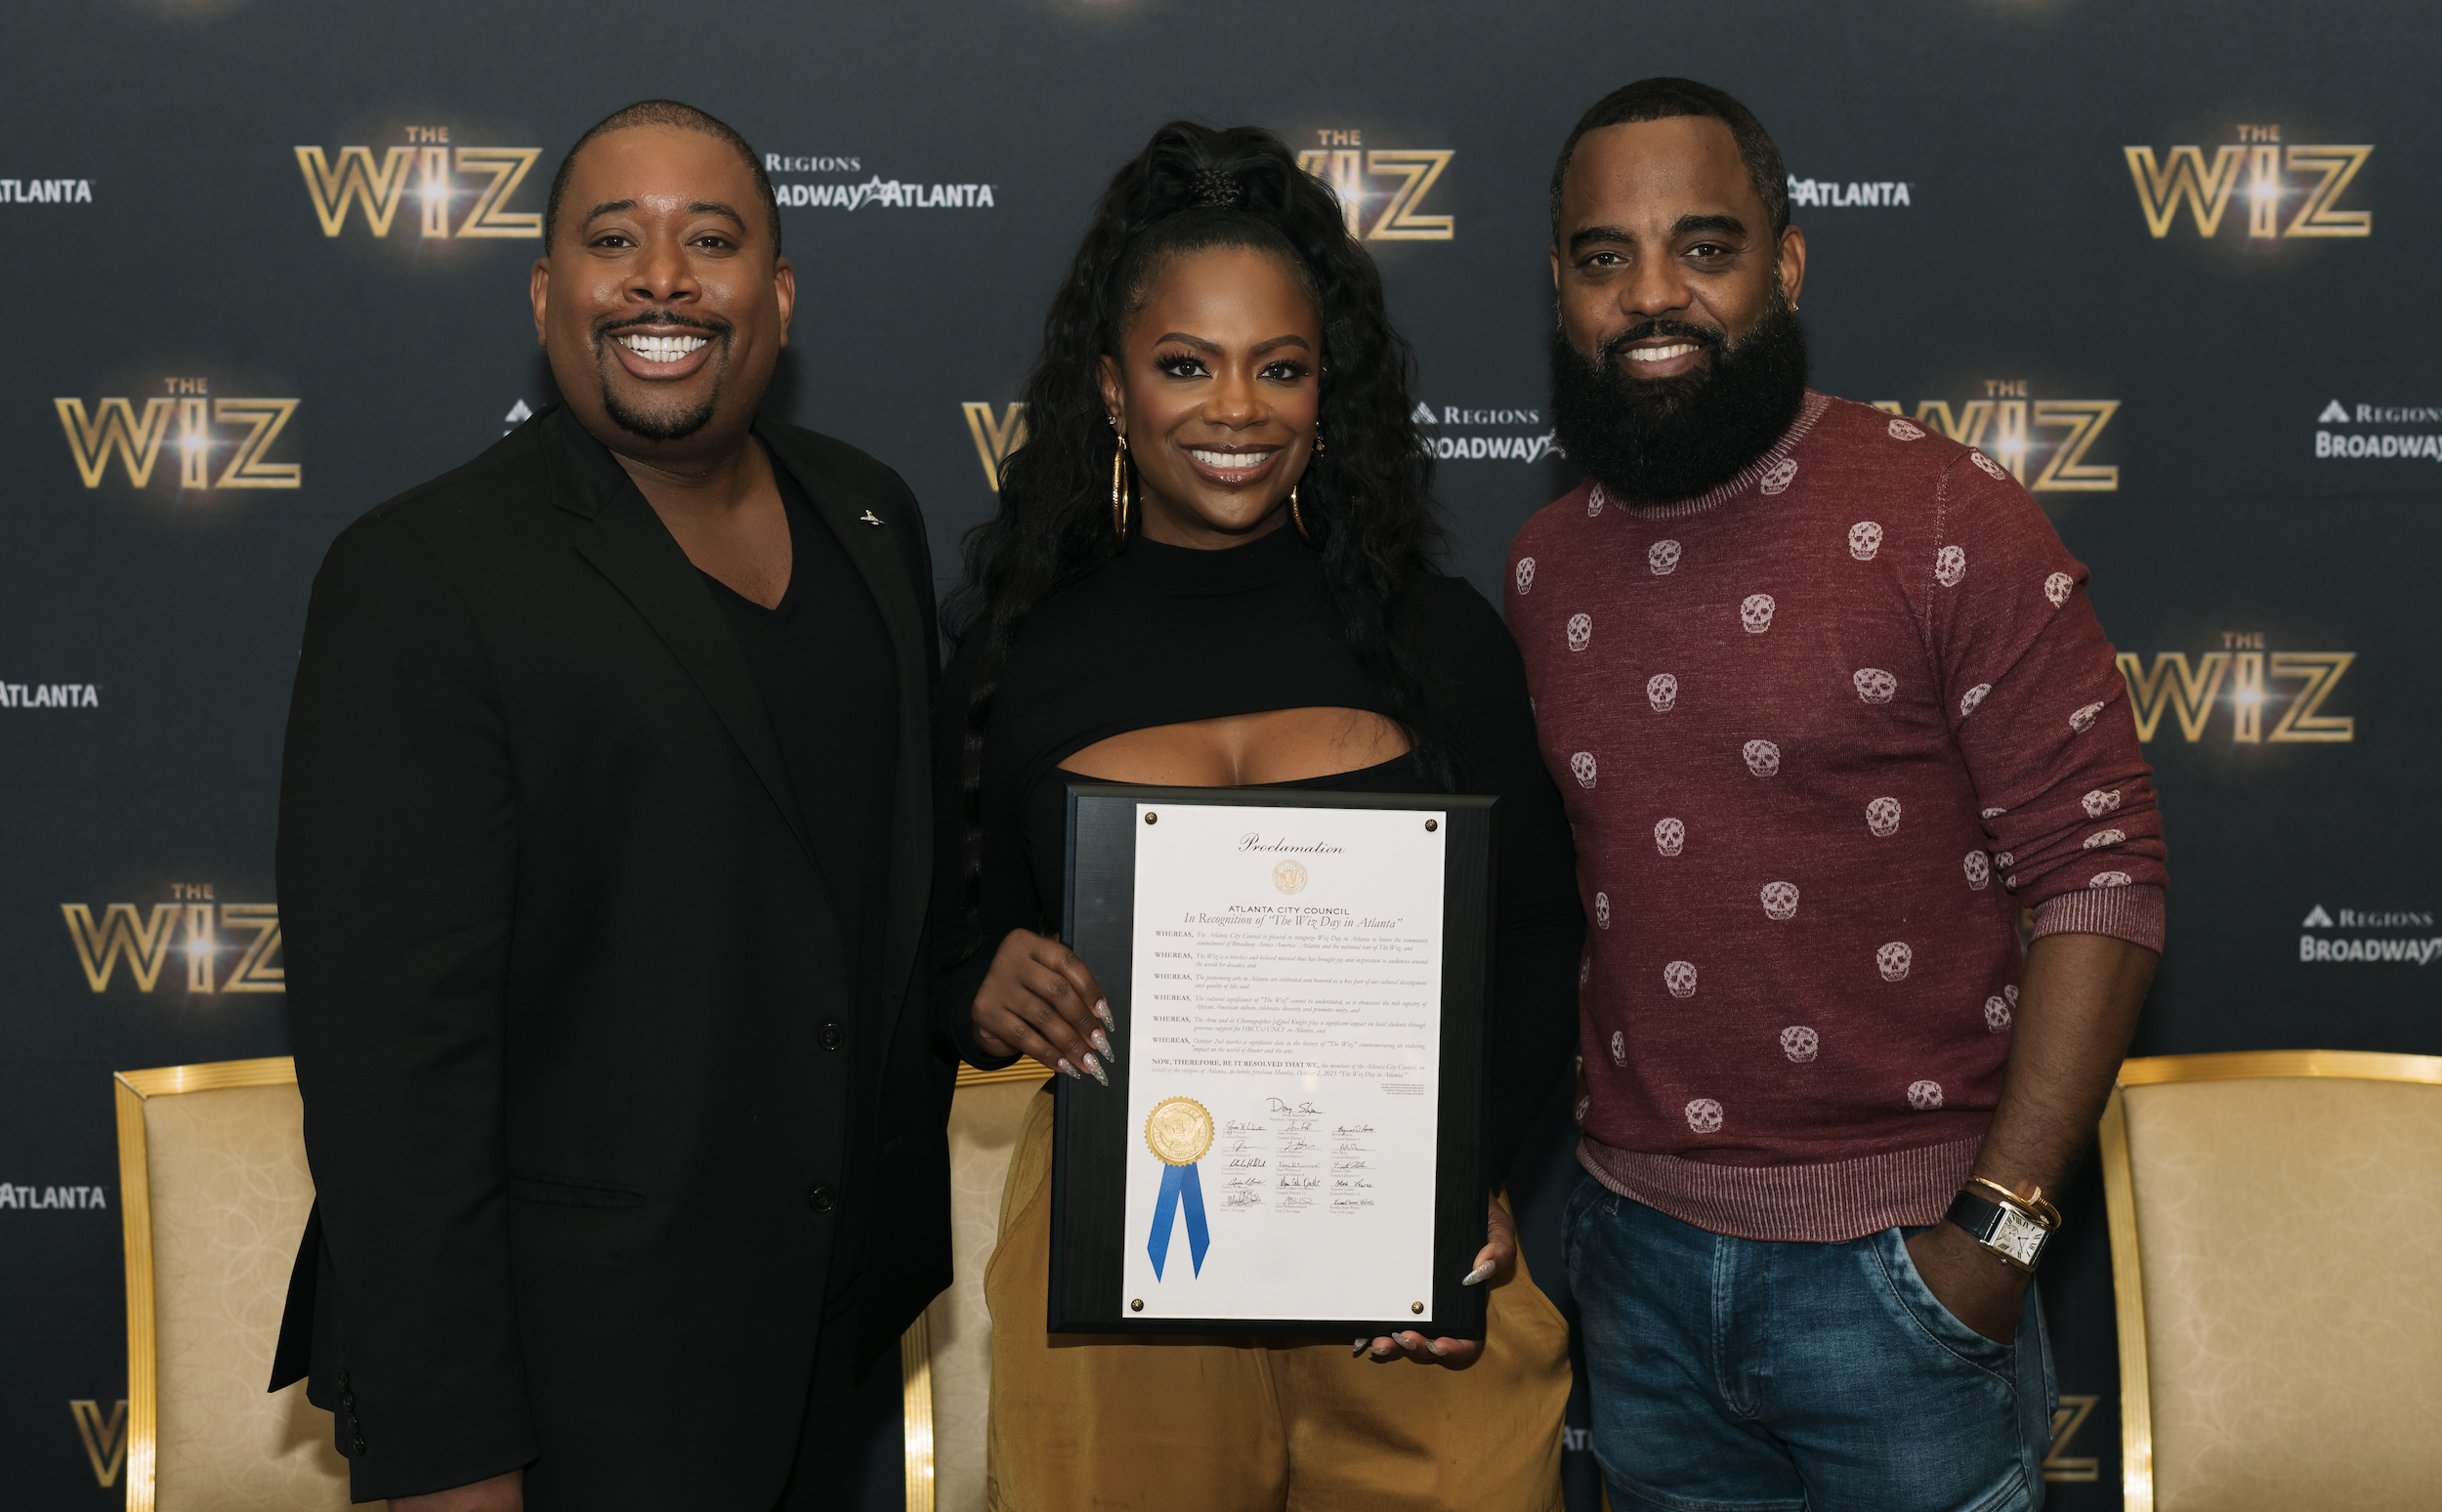 Creative lead producer Brian A. Moreland with Kandi Burruss and Todd Tucker at The Wiz preview at The Fox Theatre in Atlanta